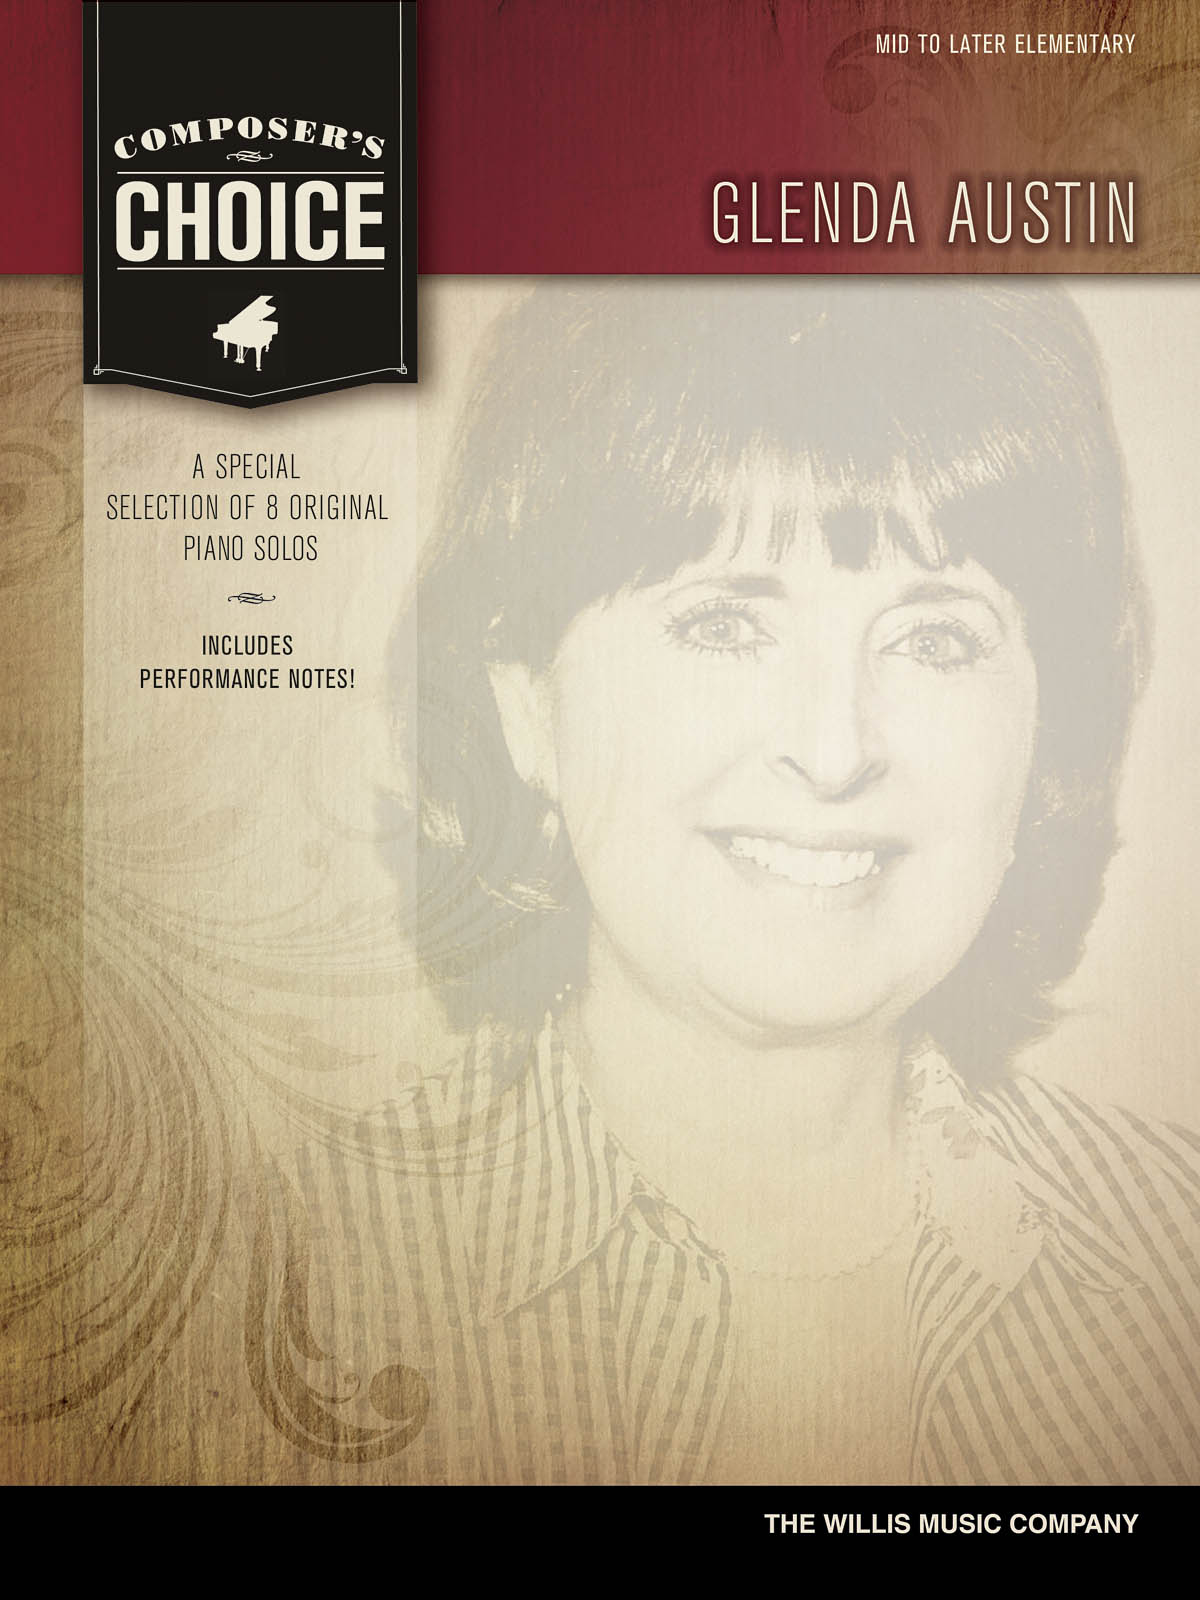 Composer's Choice - Glenda Austin - Mid to Later Elementary Level - noty pro keyboard